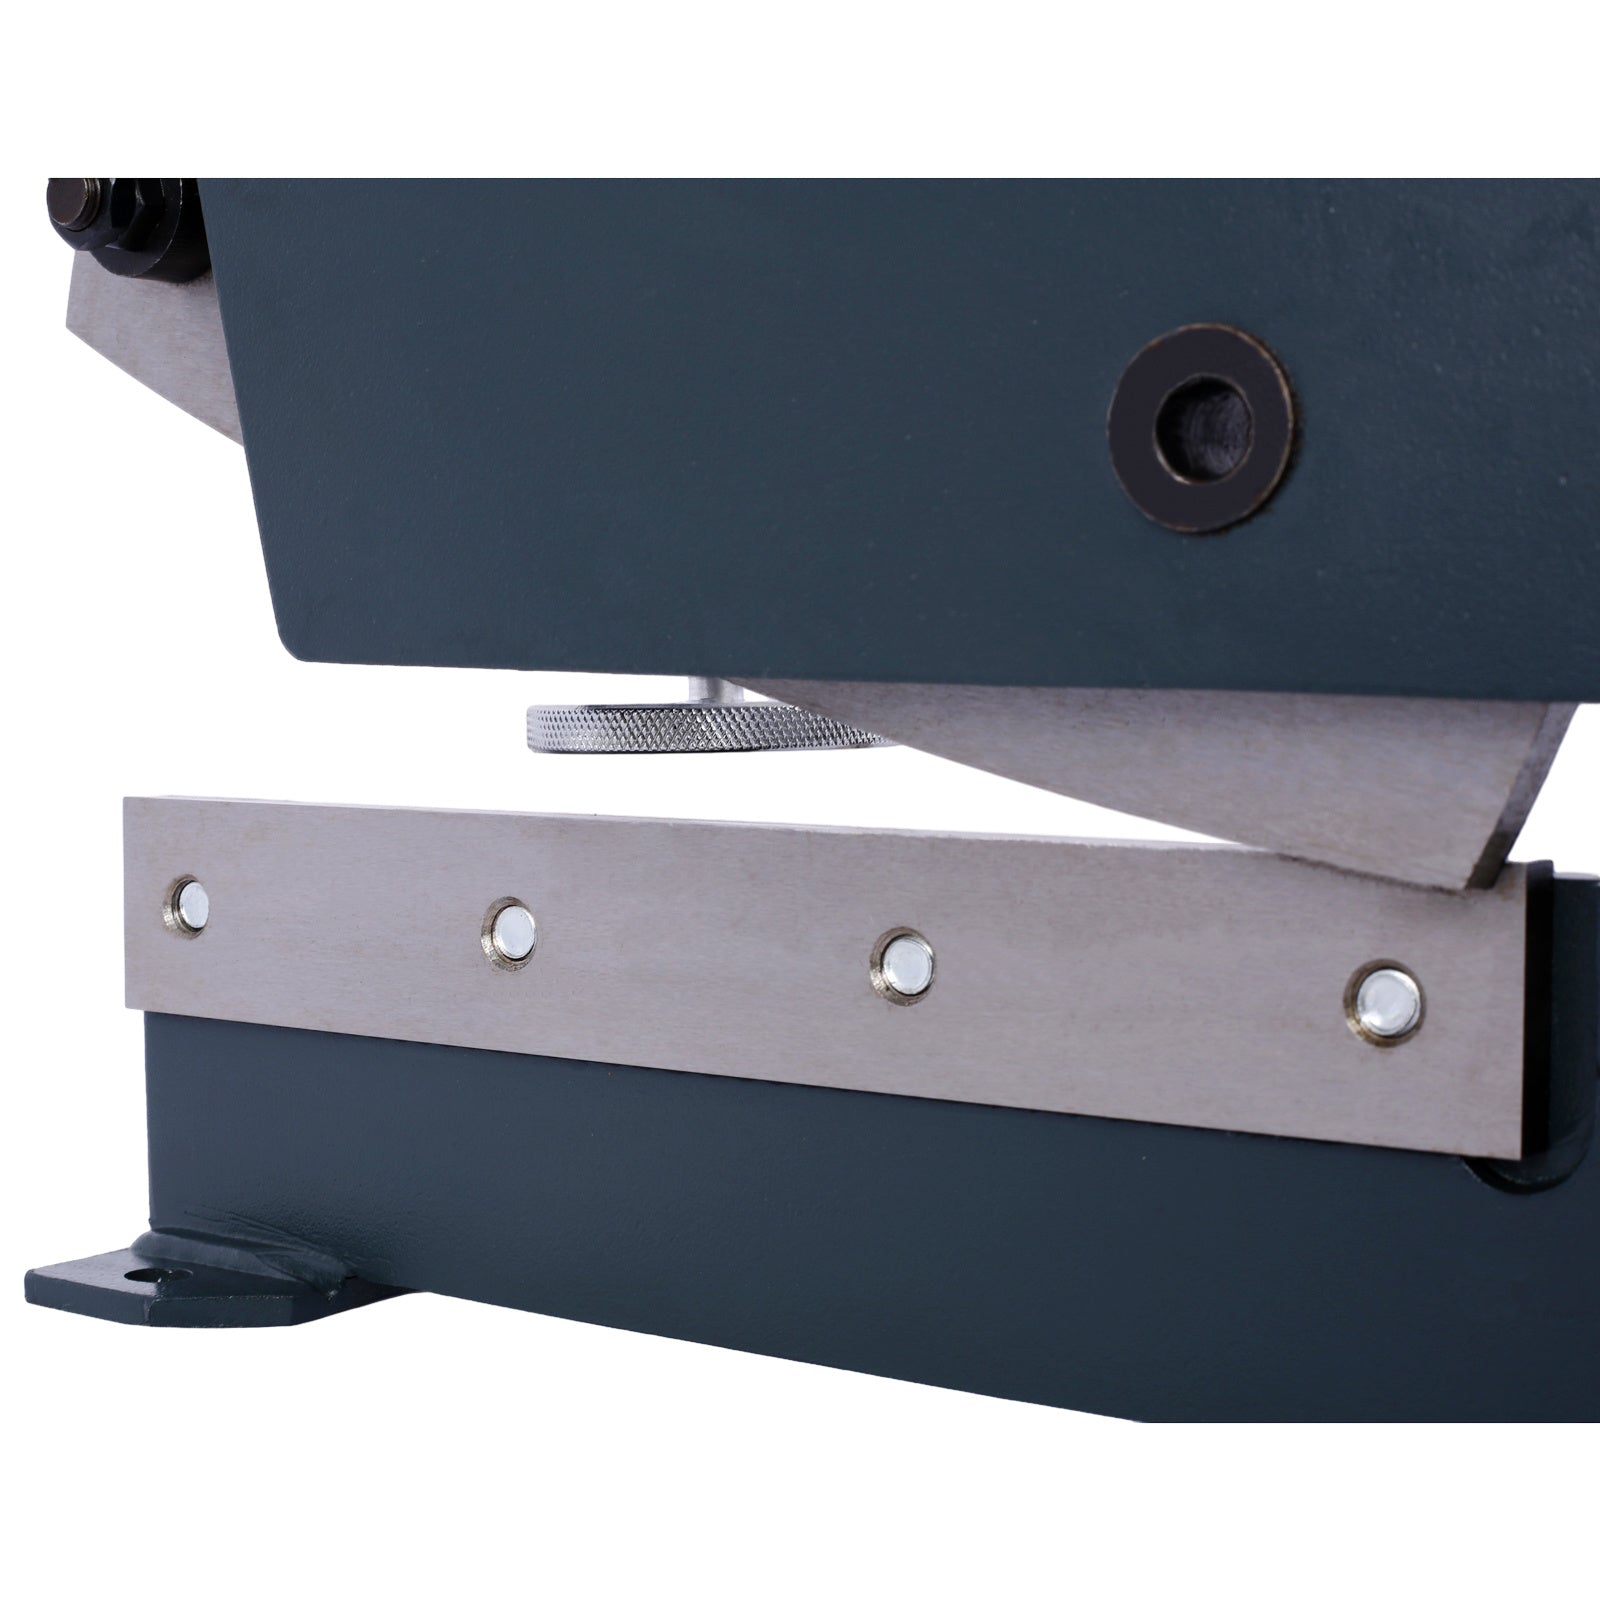 Industrial 10-Inch Sheet Metal Plate Shear, Solid Construction Mounting Type Metal Shear, High Precision Manual Hand Plate Shear